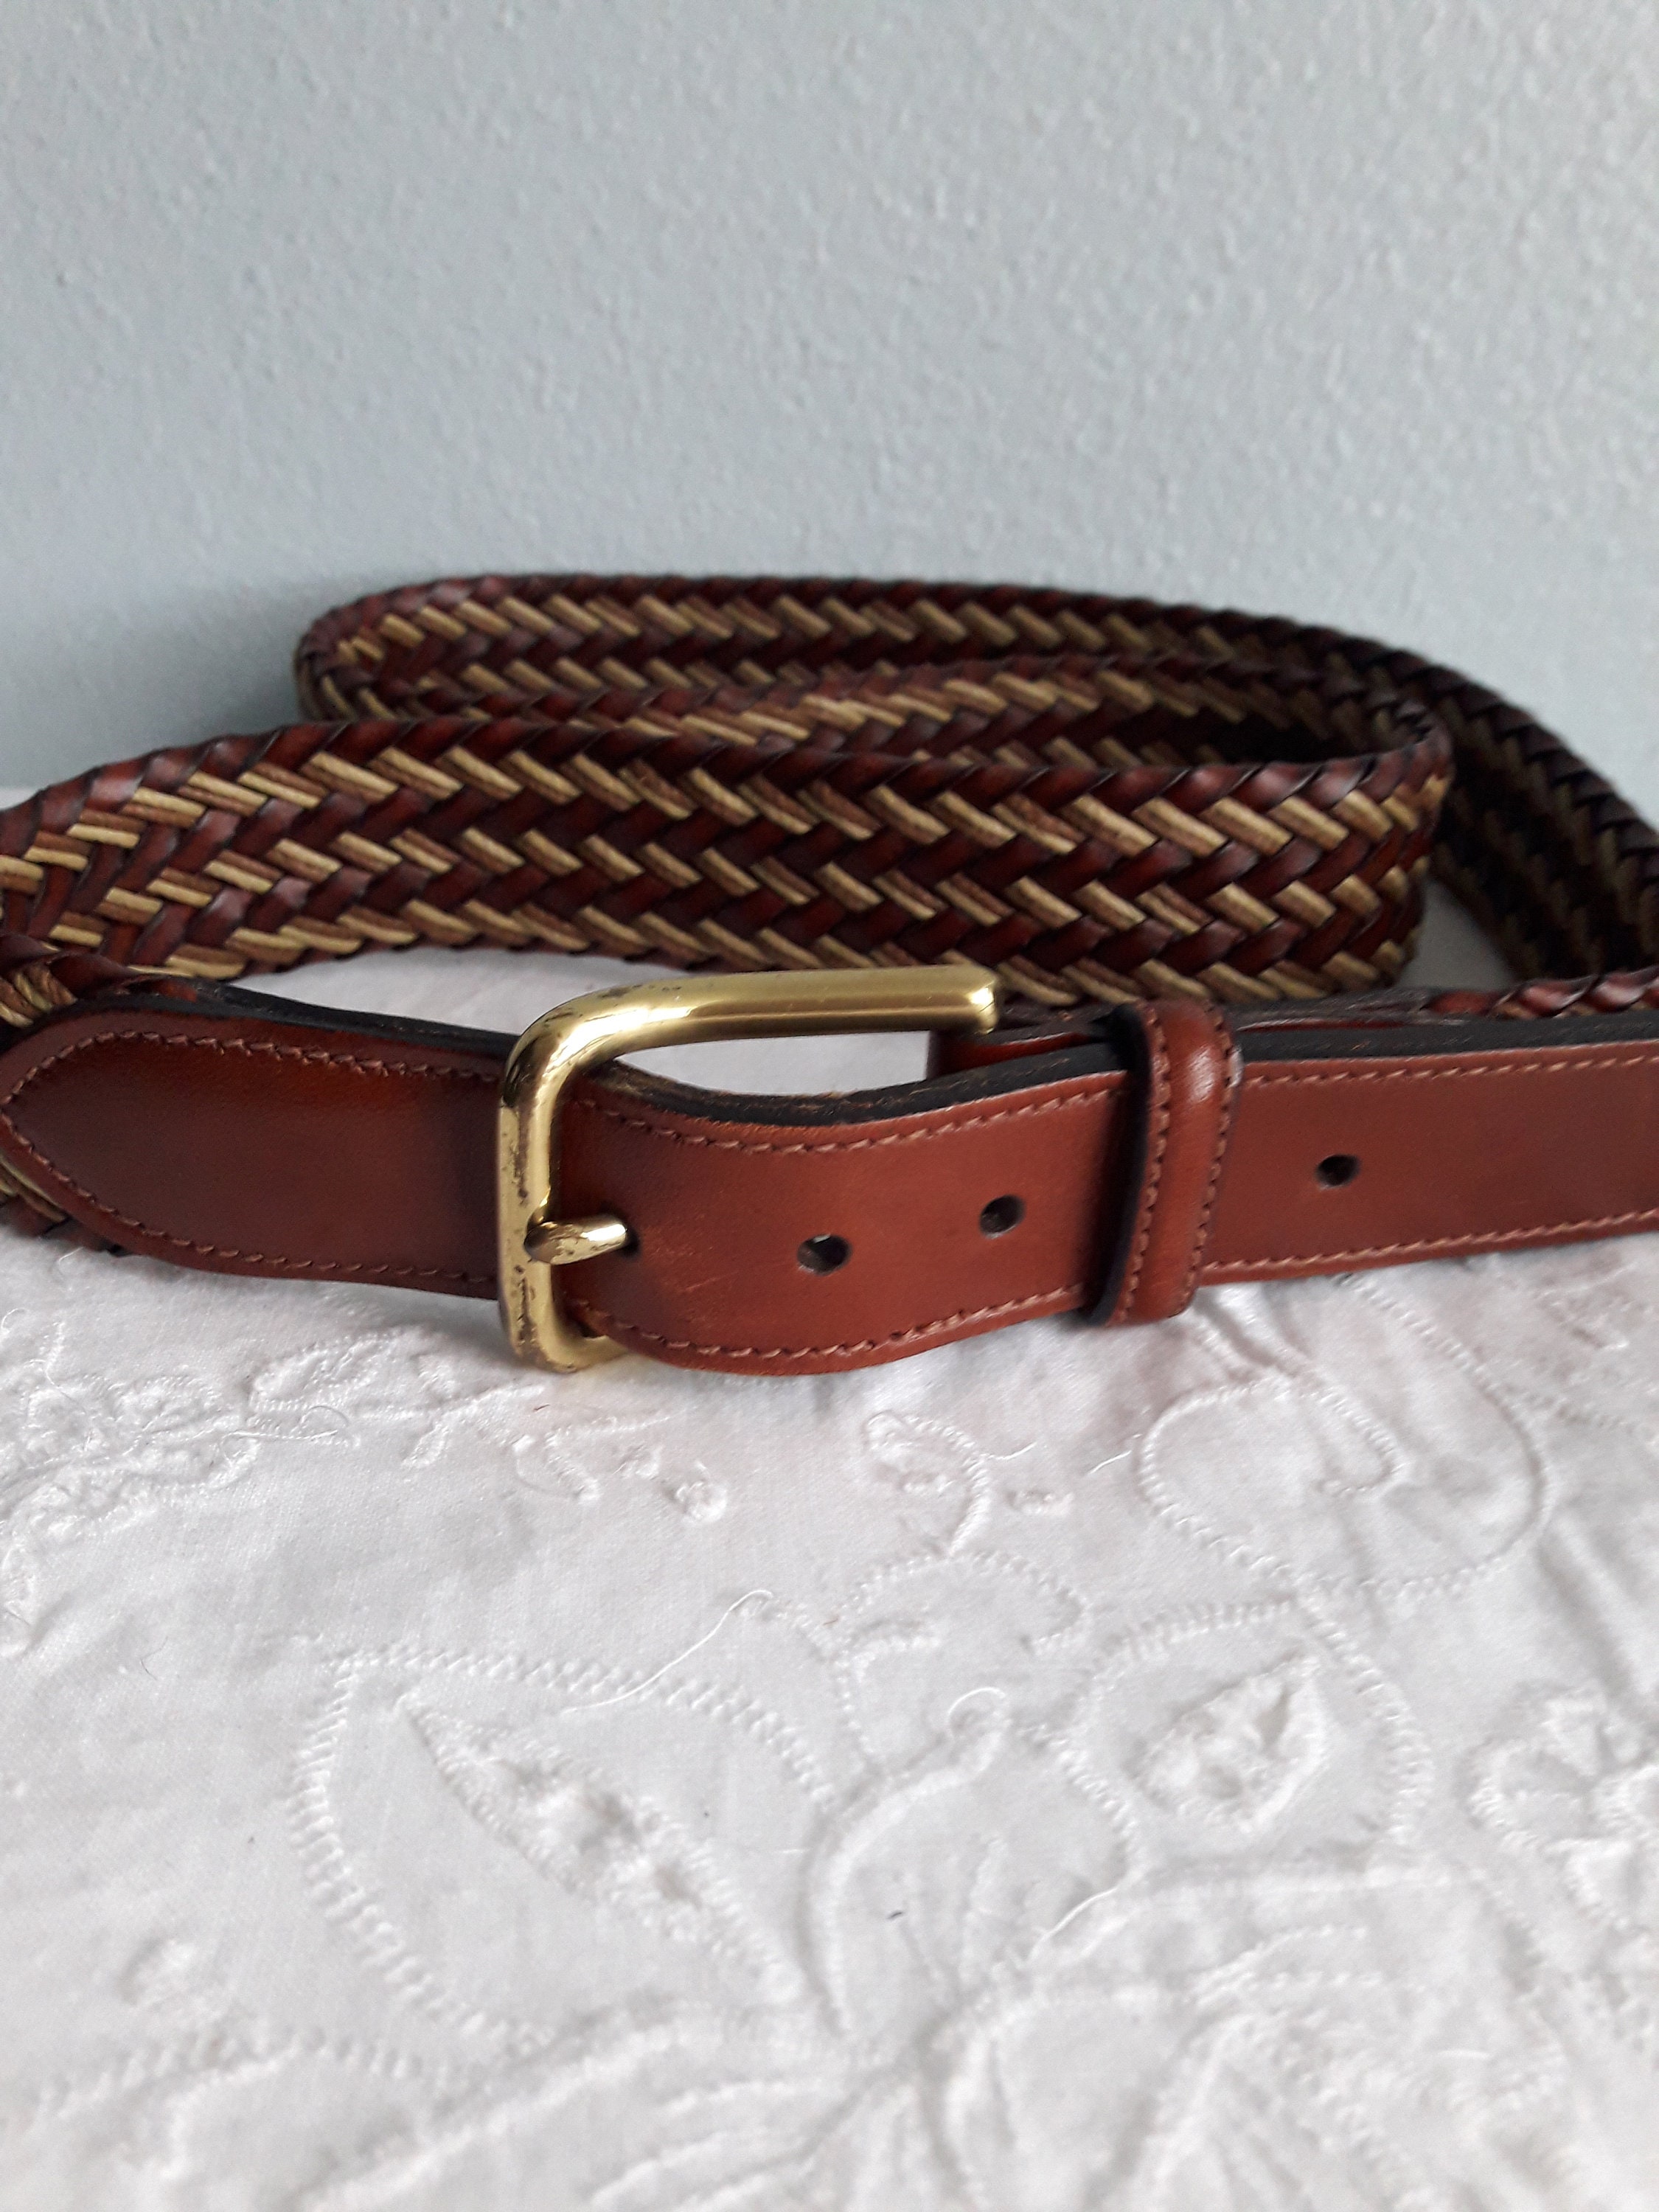 Brooks Brothers Woven Braided Waist Belt Beige, Tan and Brown